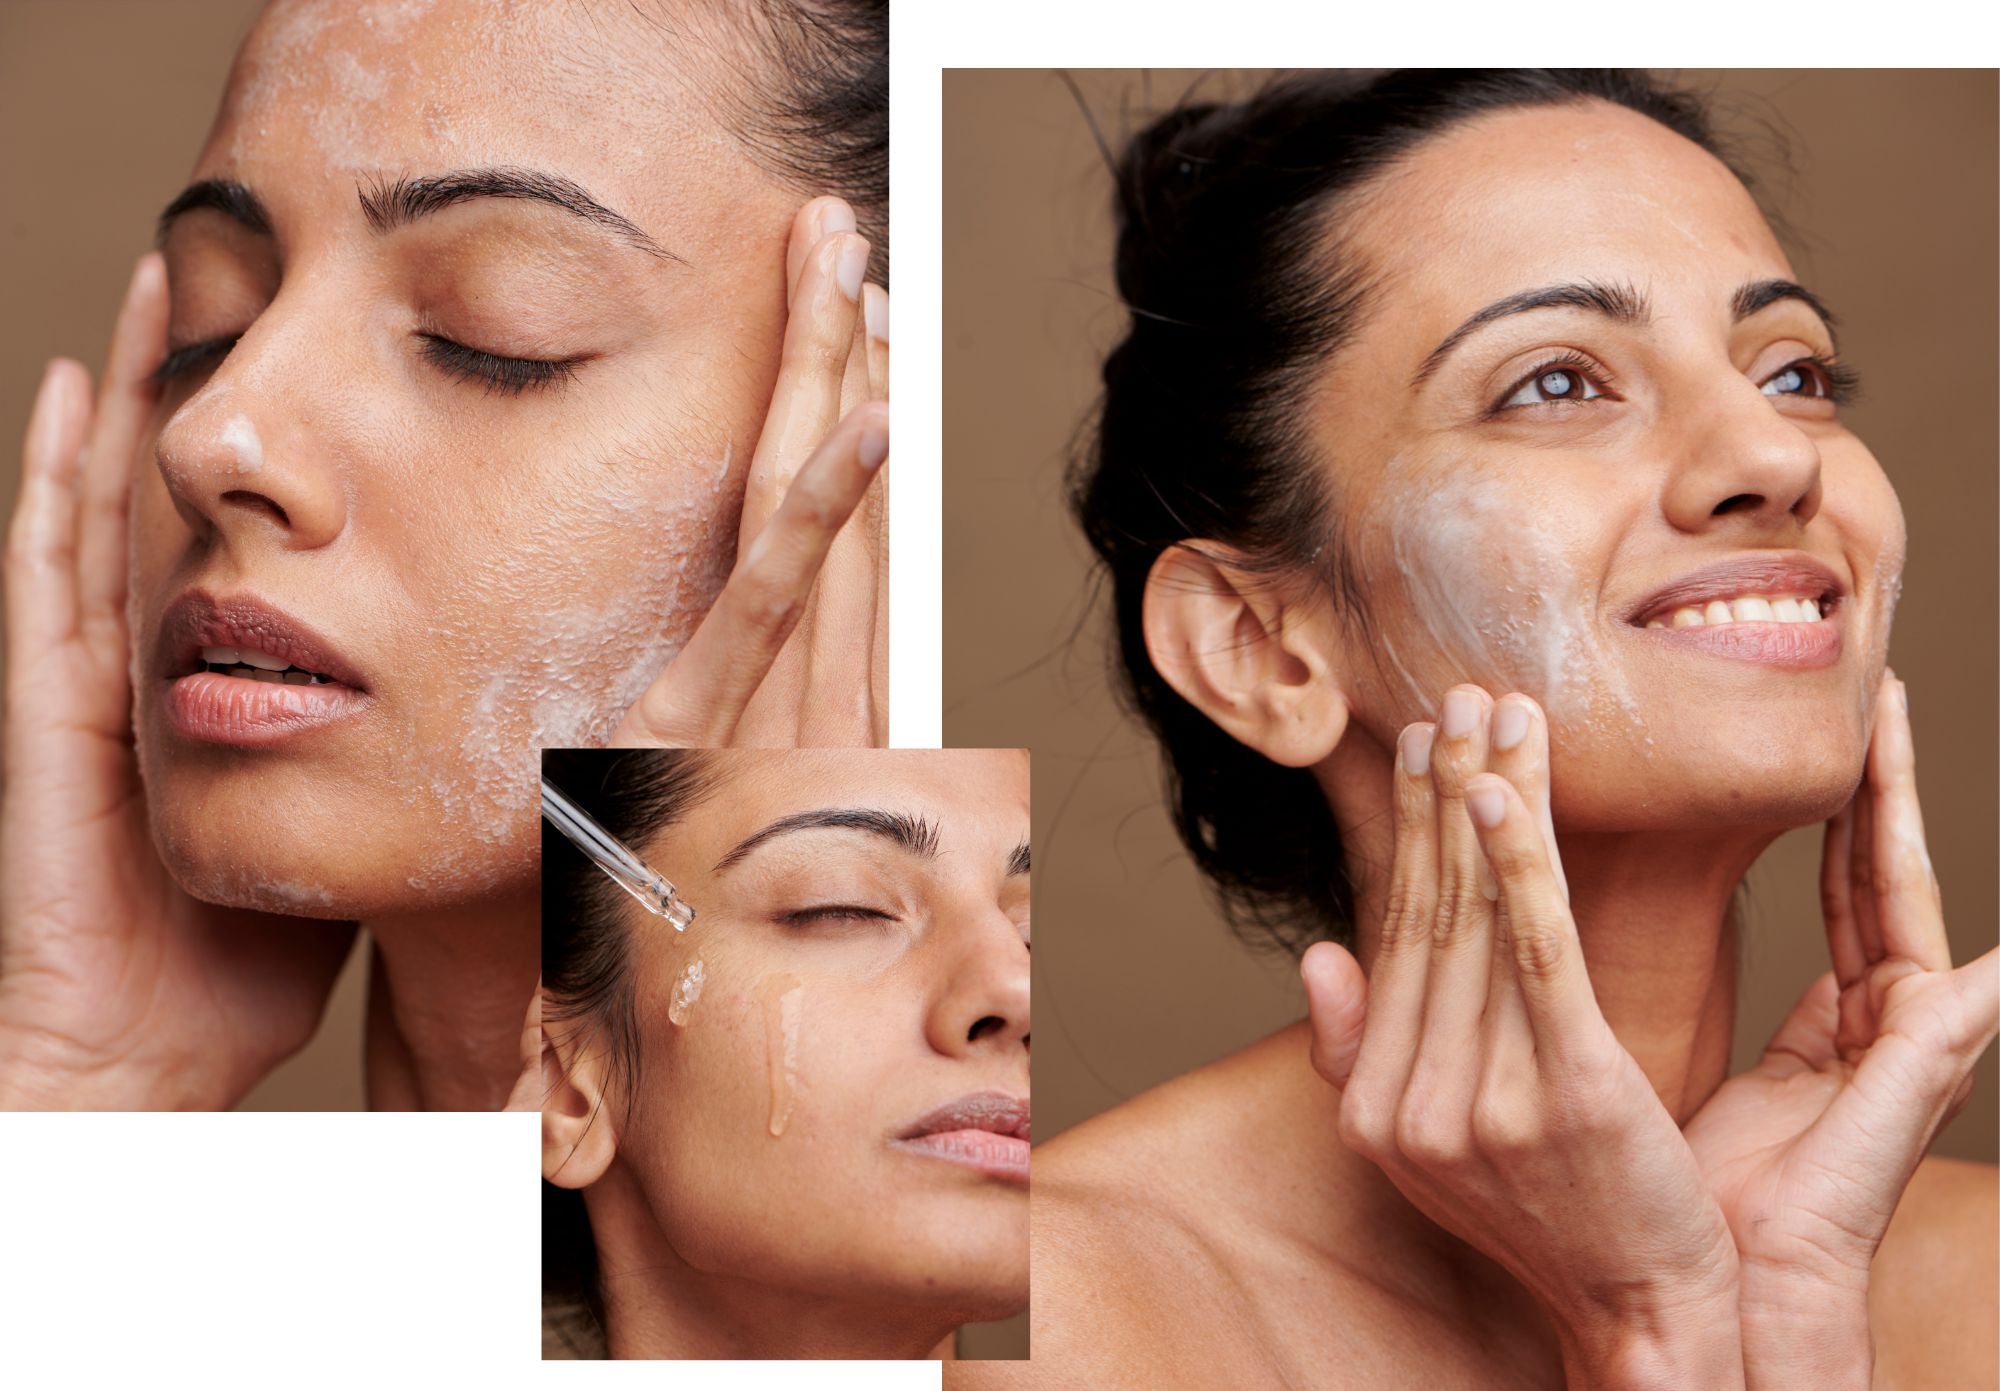 Skincare 101: Building a Daily Beauty Routine